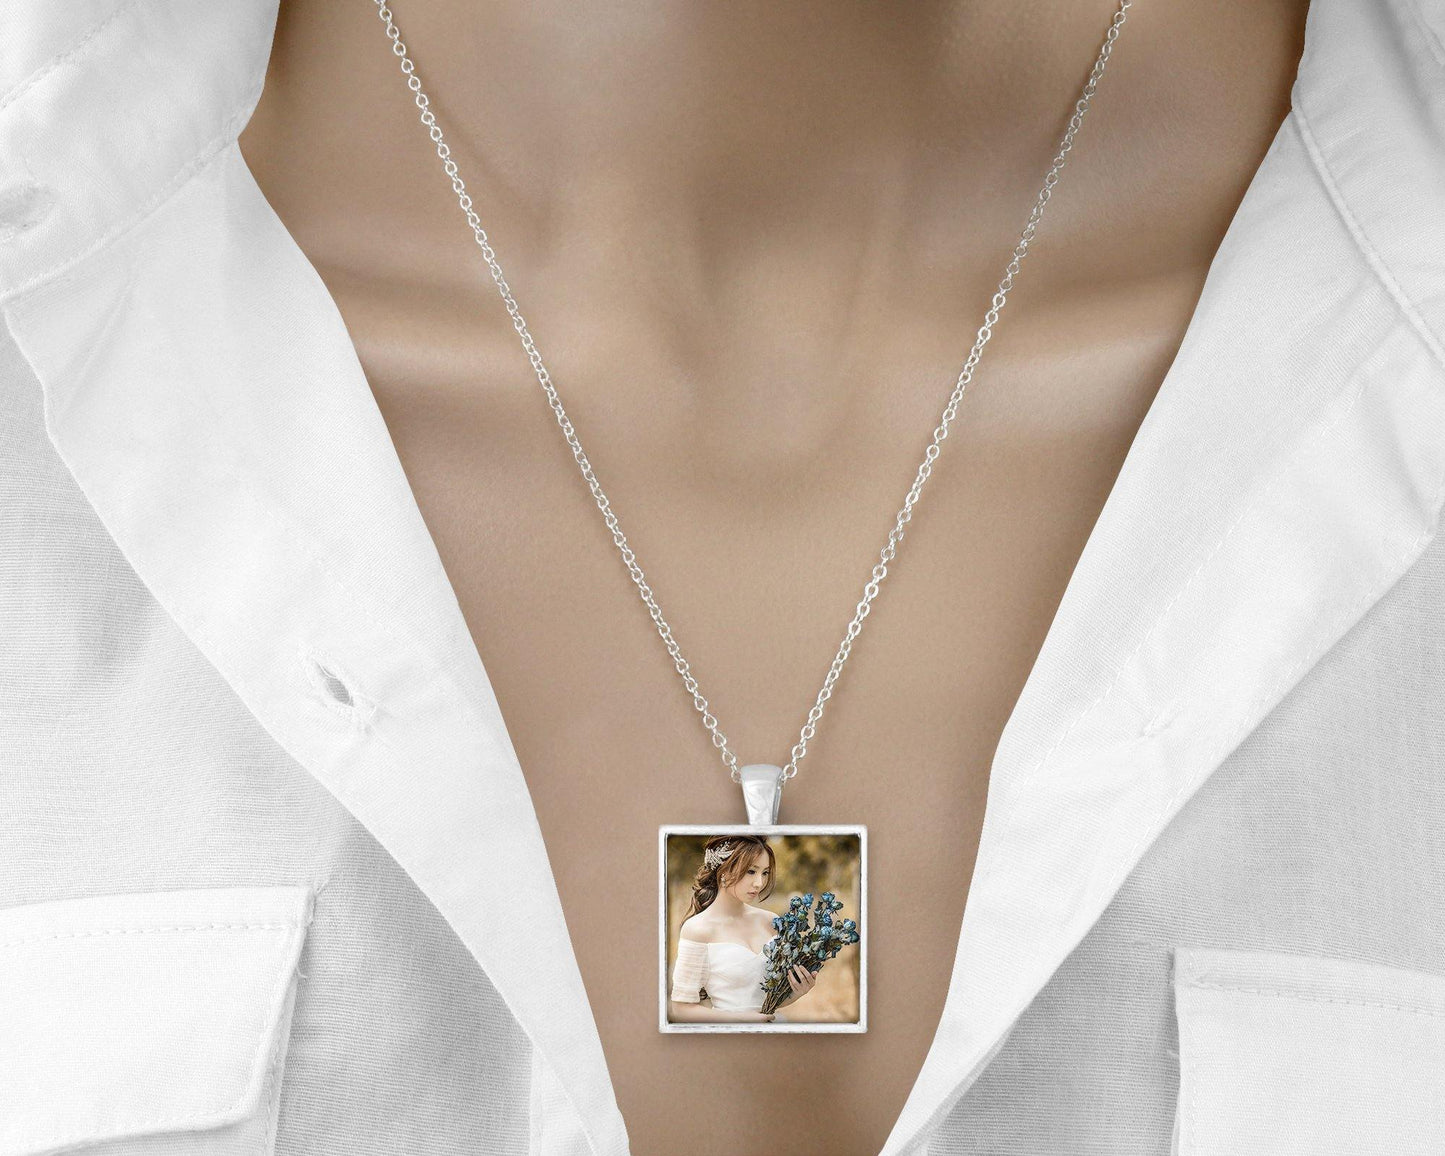 Create Your Own Square Bezel Pendant - Schoppix Gifts